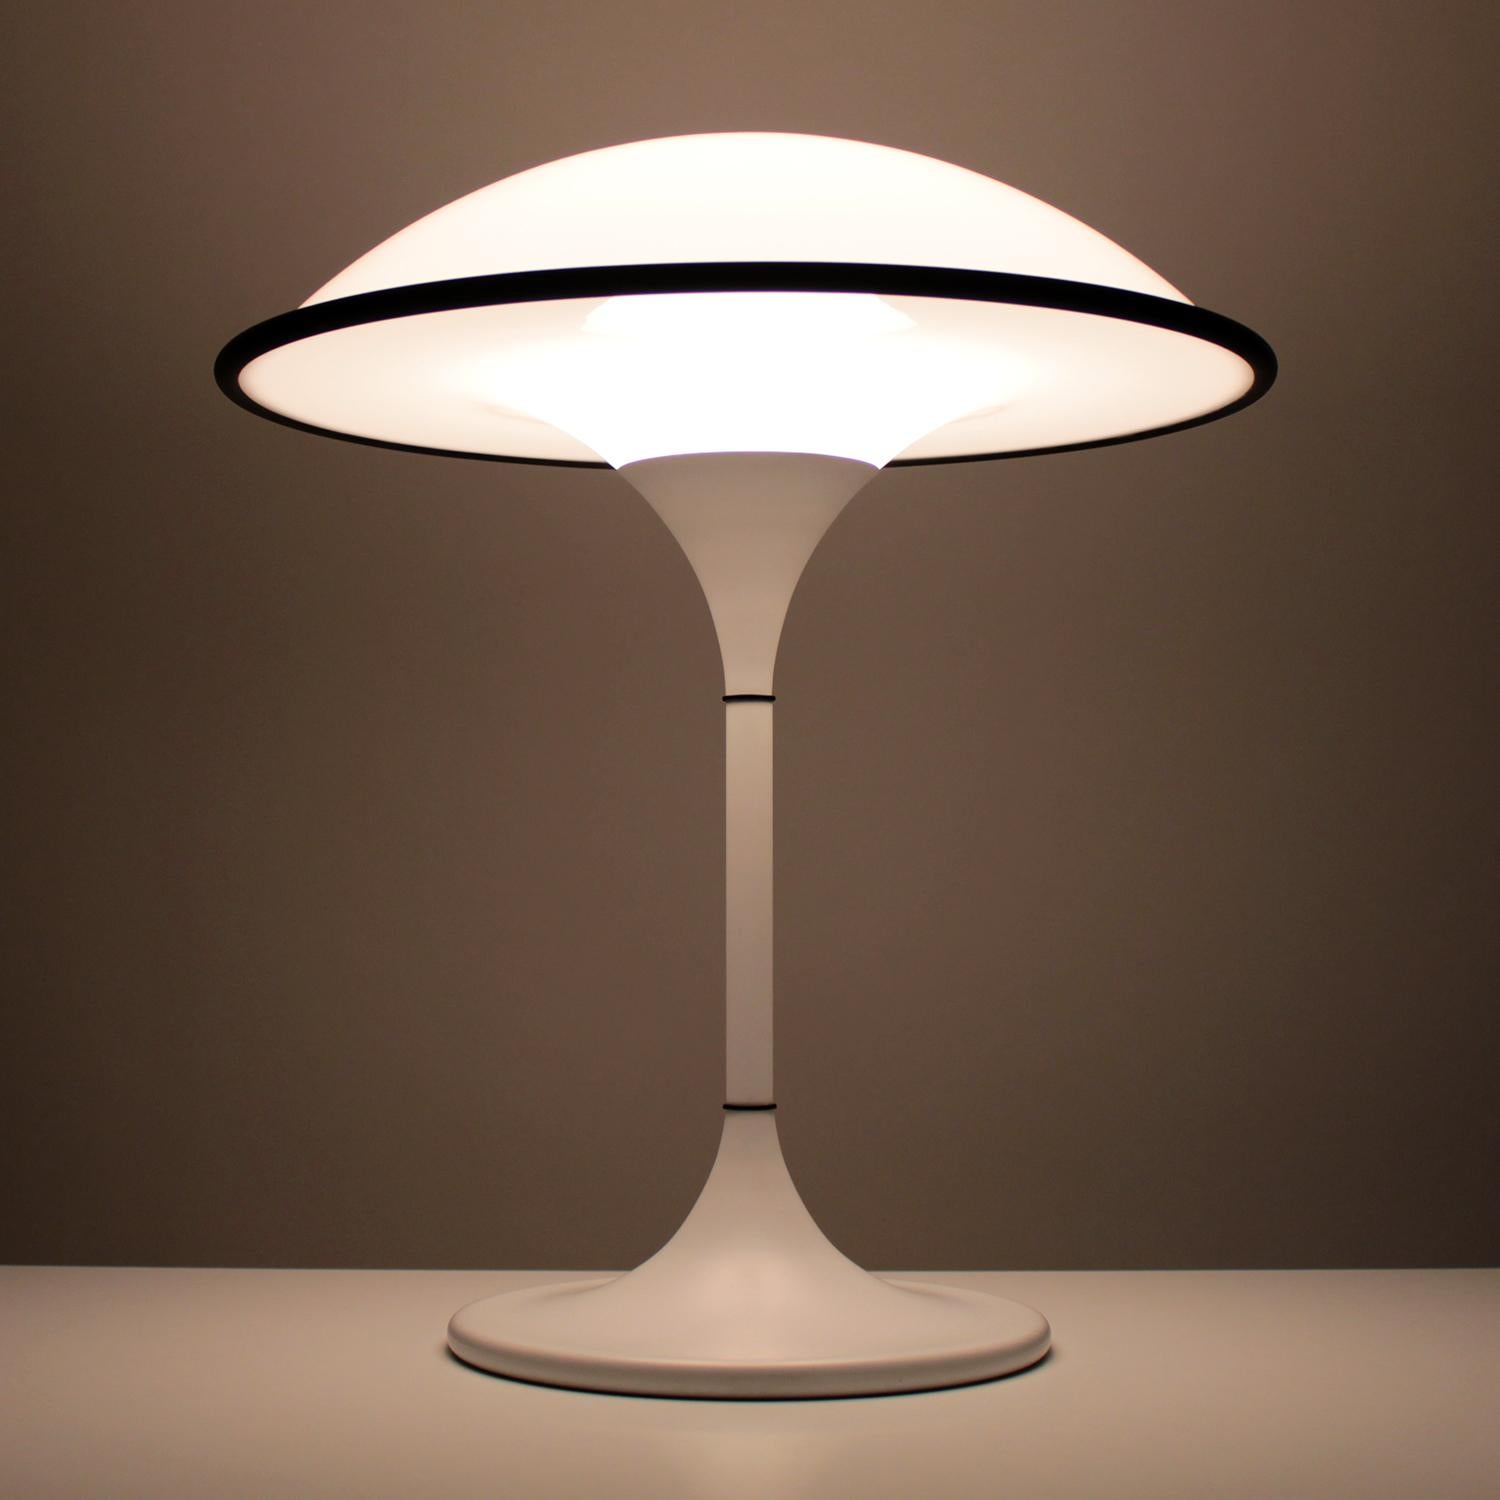 Danish Cosmos Table Lamp by Preben Jacobsen for Fog & Morup in 1984